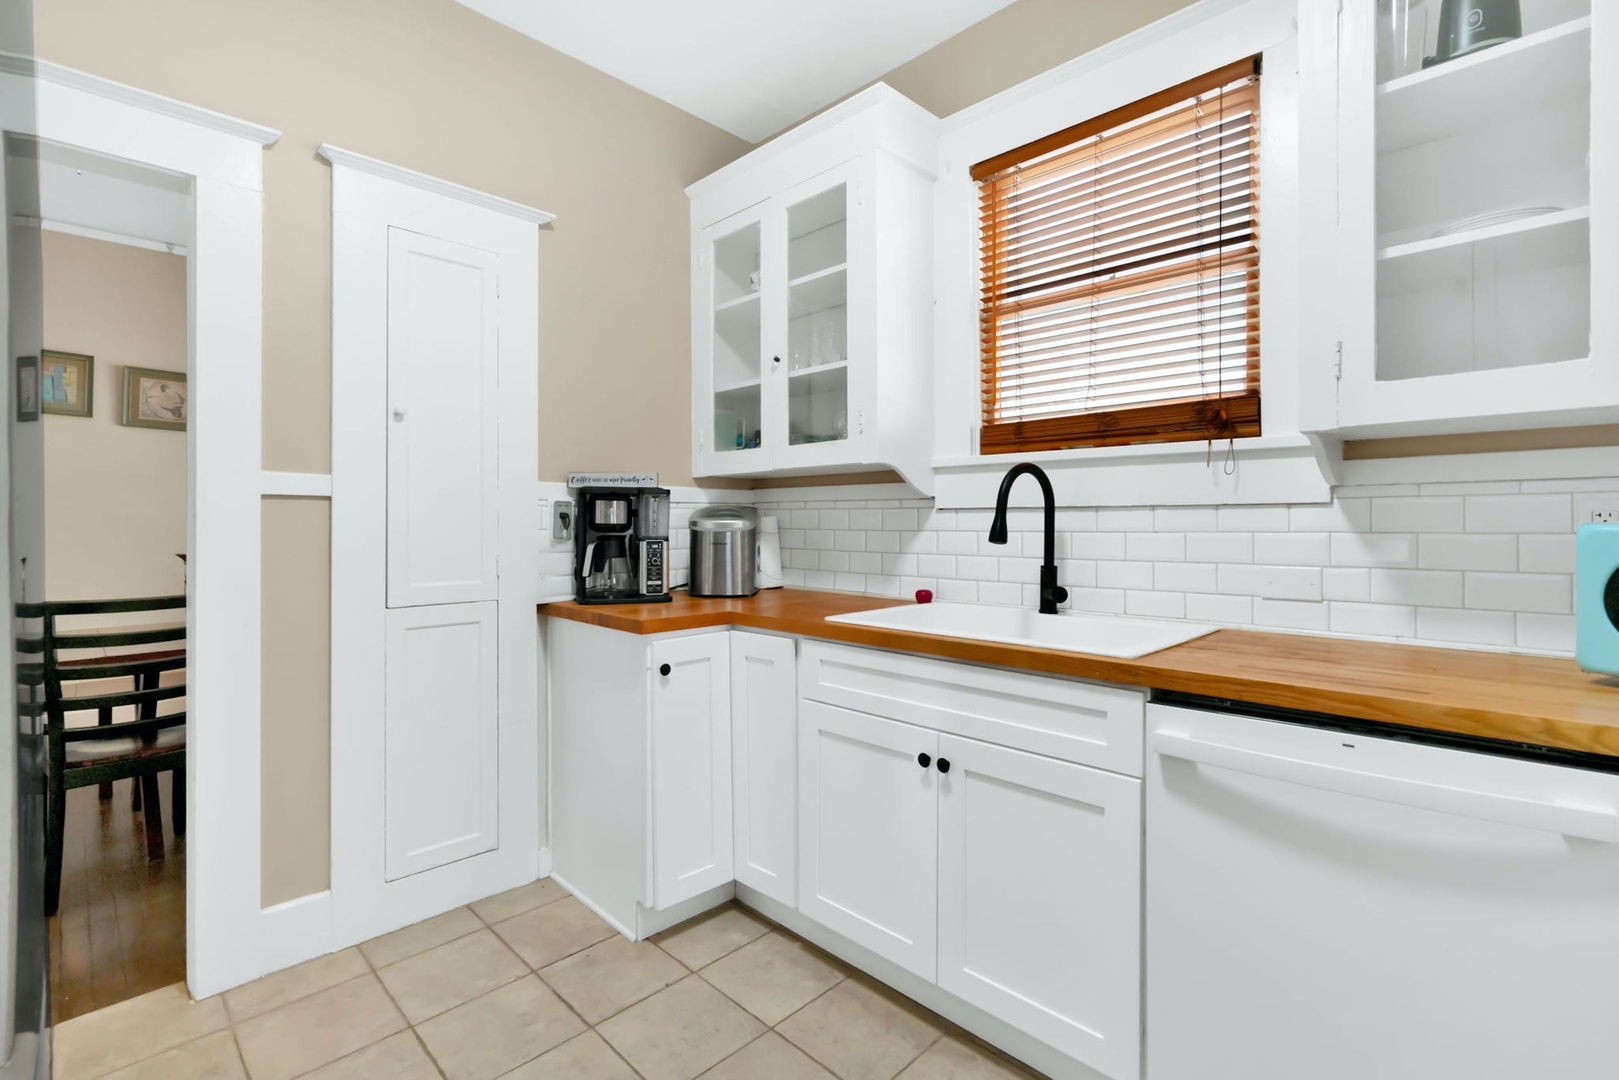 The cozy kitchen provides ample space & every home comfort